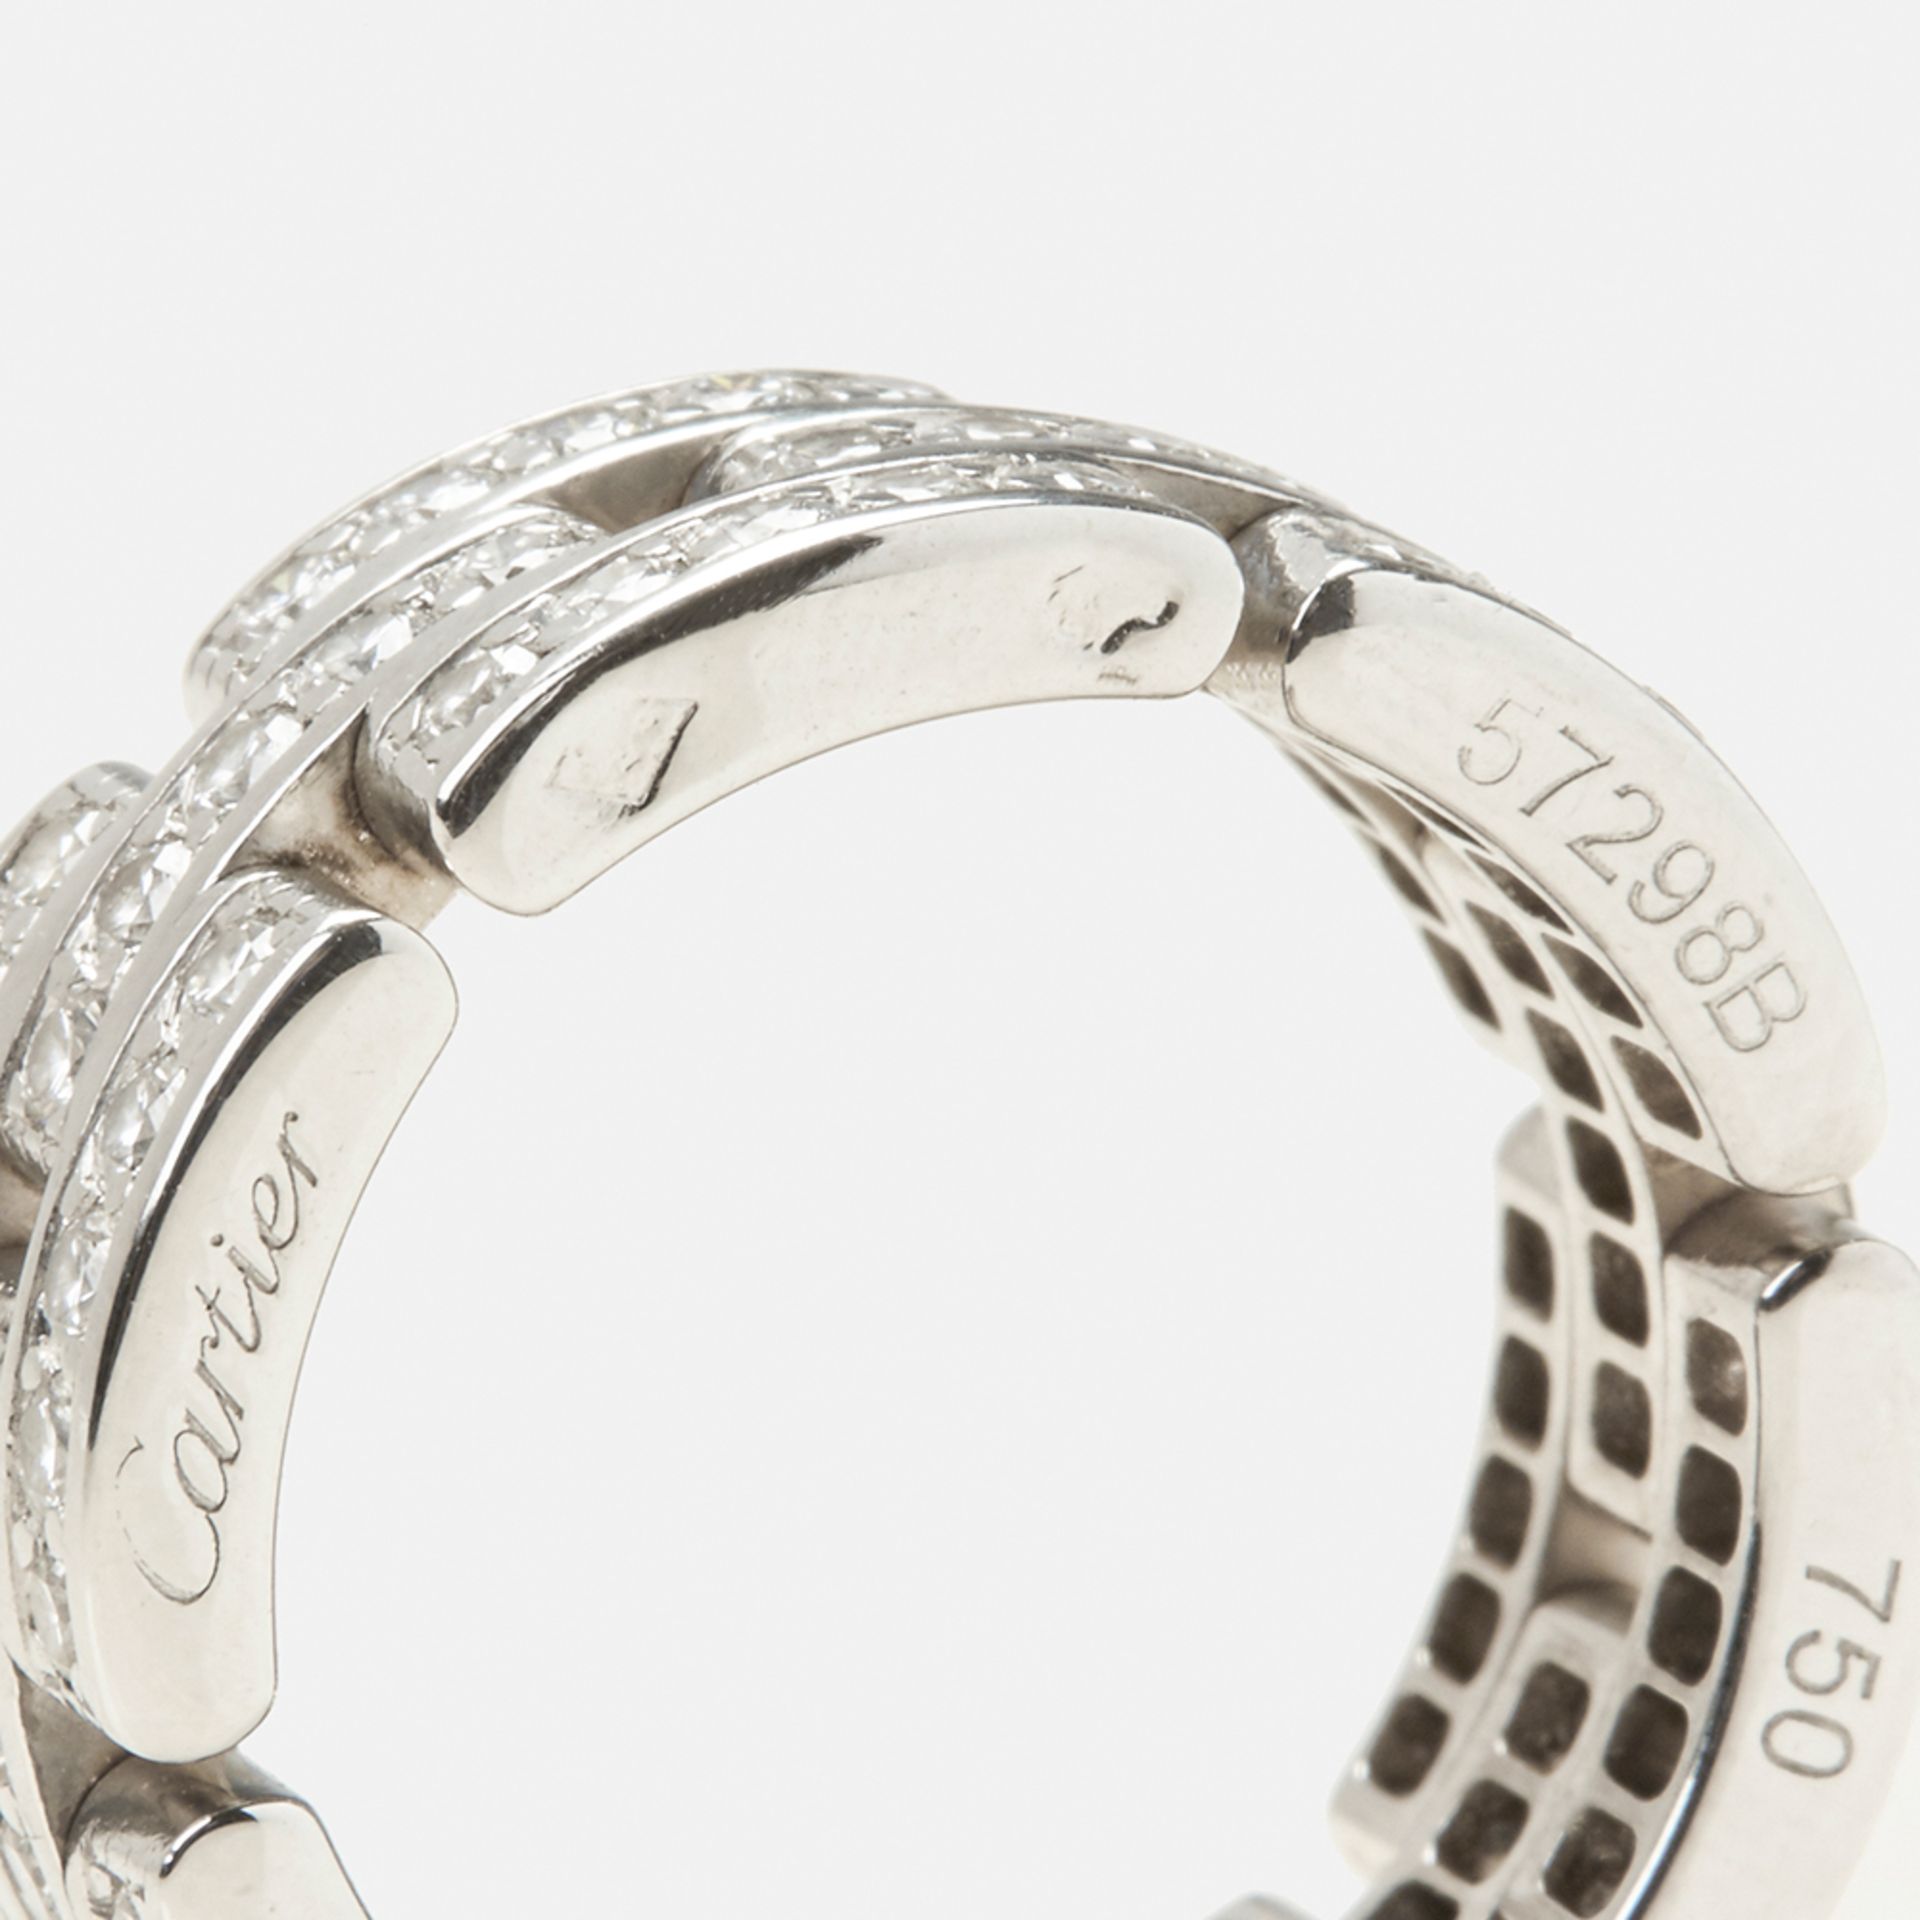 Cartier 18k White Gold Diamond Maillon Ring - Image 6 of 8